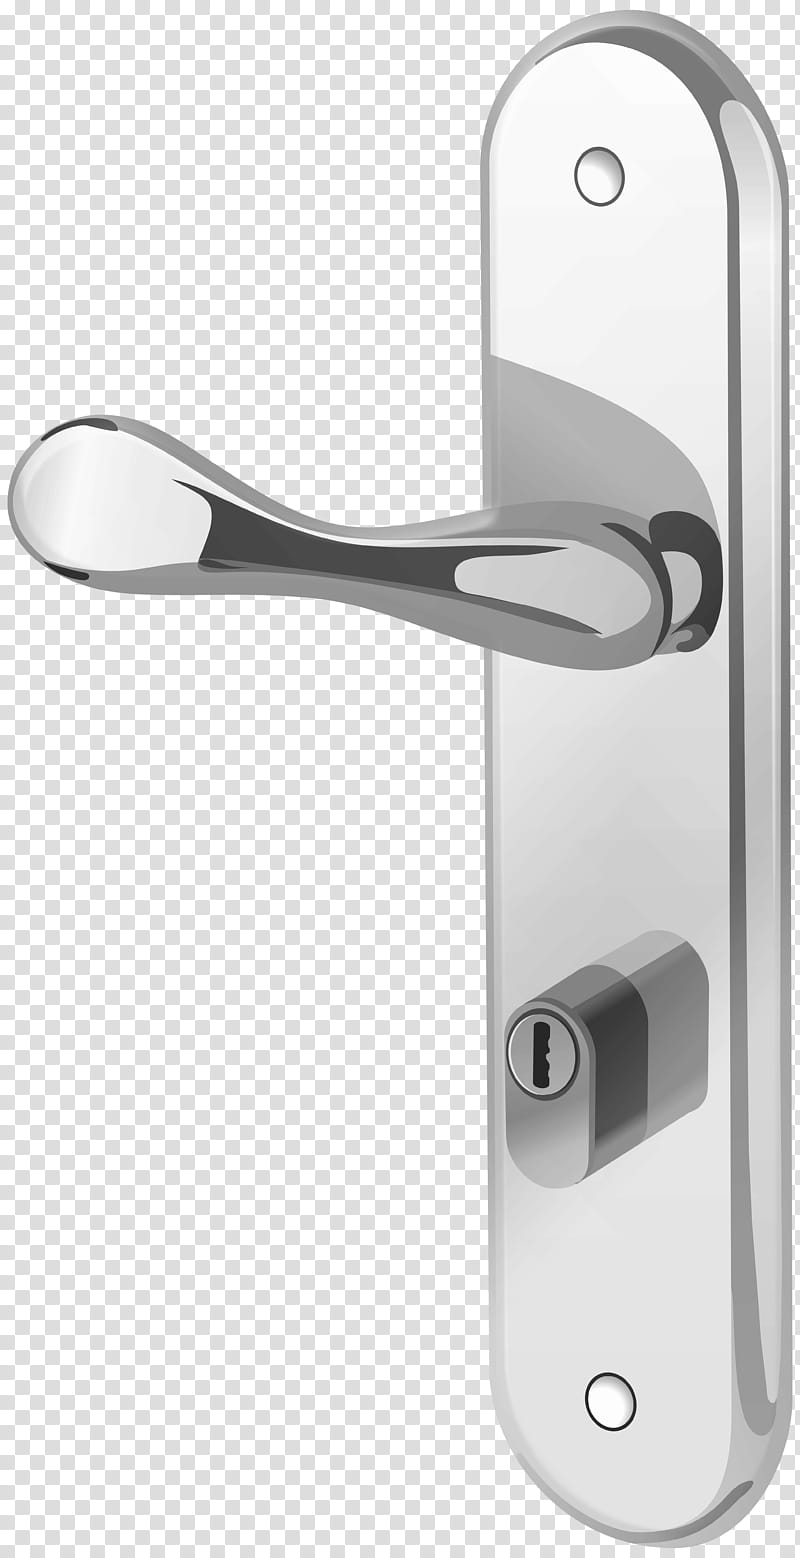 Metal, Lock And Key, Door Handle, Knauf, Latch, Hardware Accessory transparent background PNG clipart